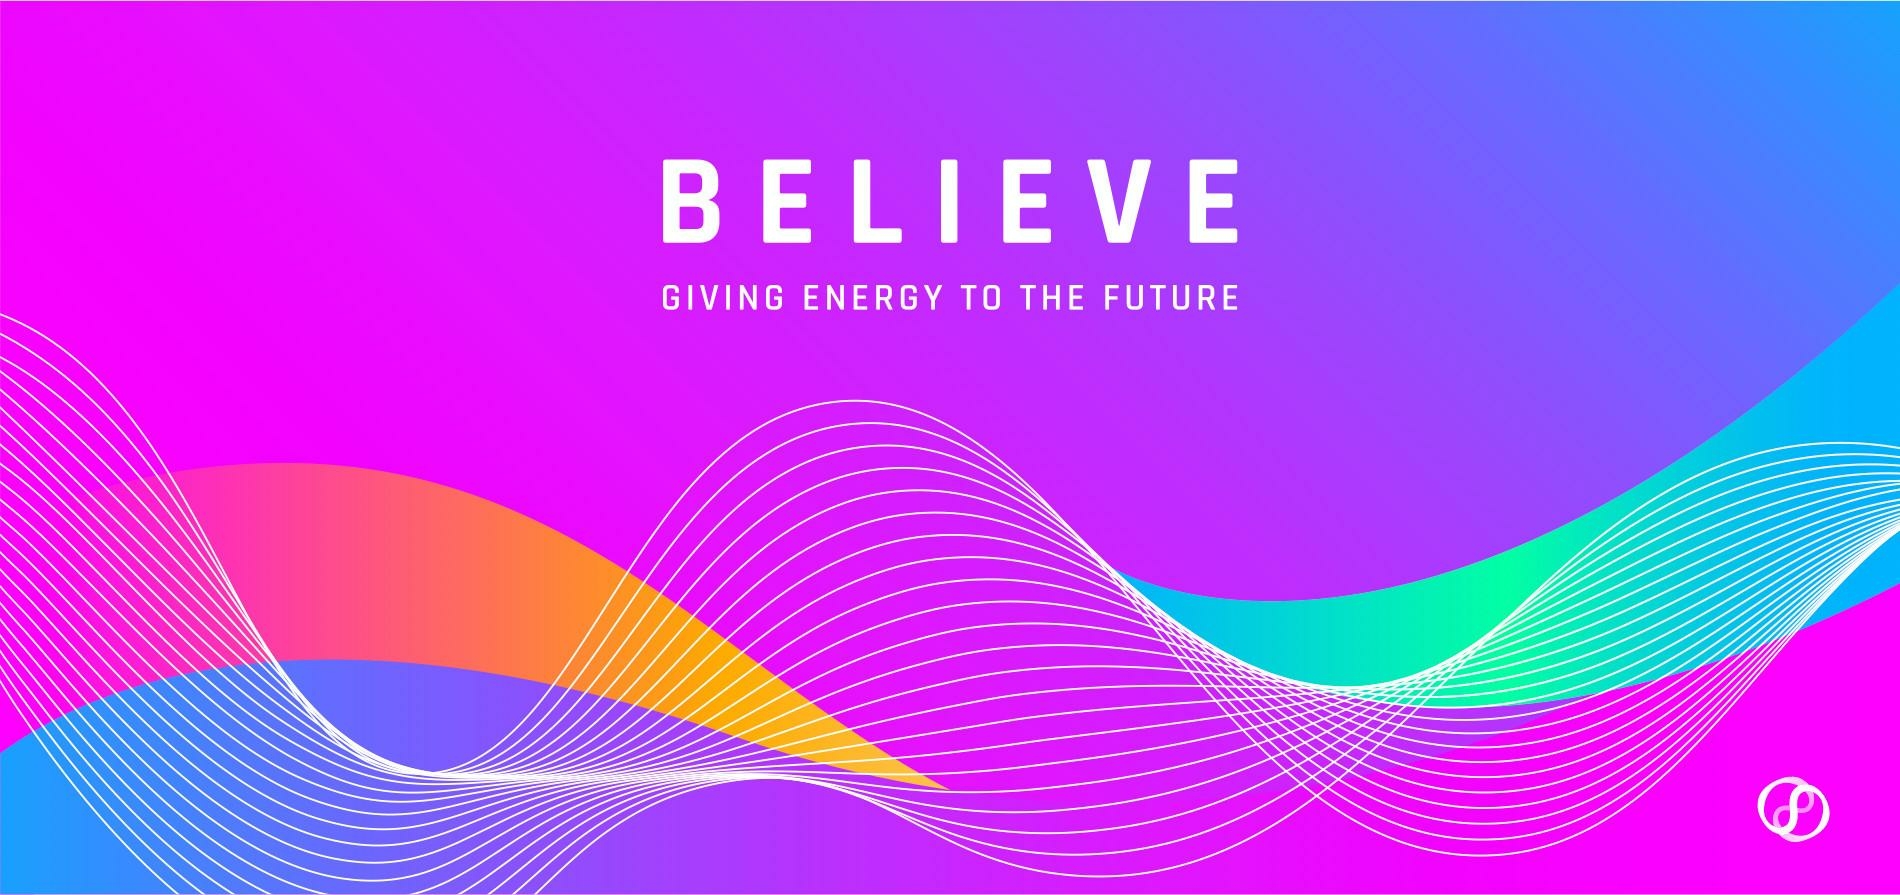 Believe - Giving energy to the future